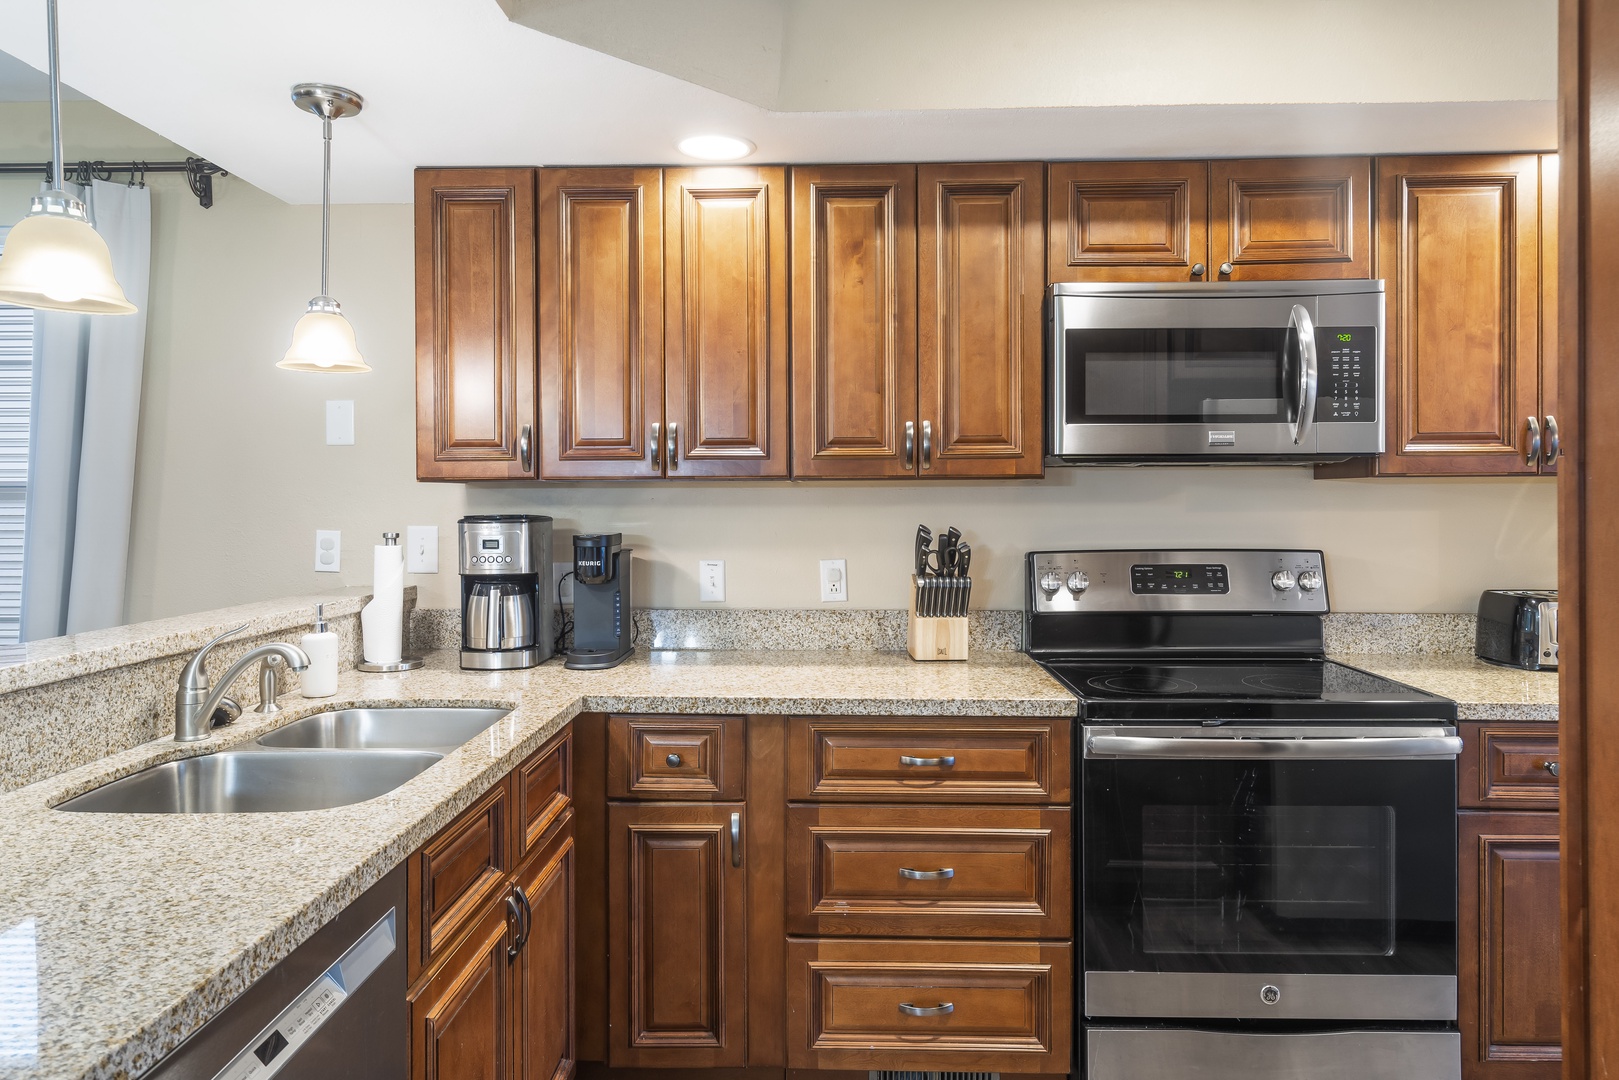 Kitchen features coffee pot and more!